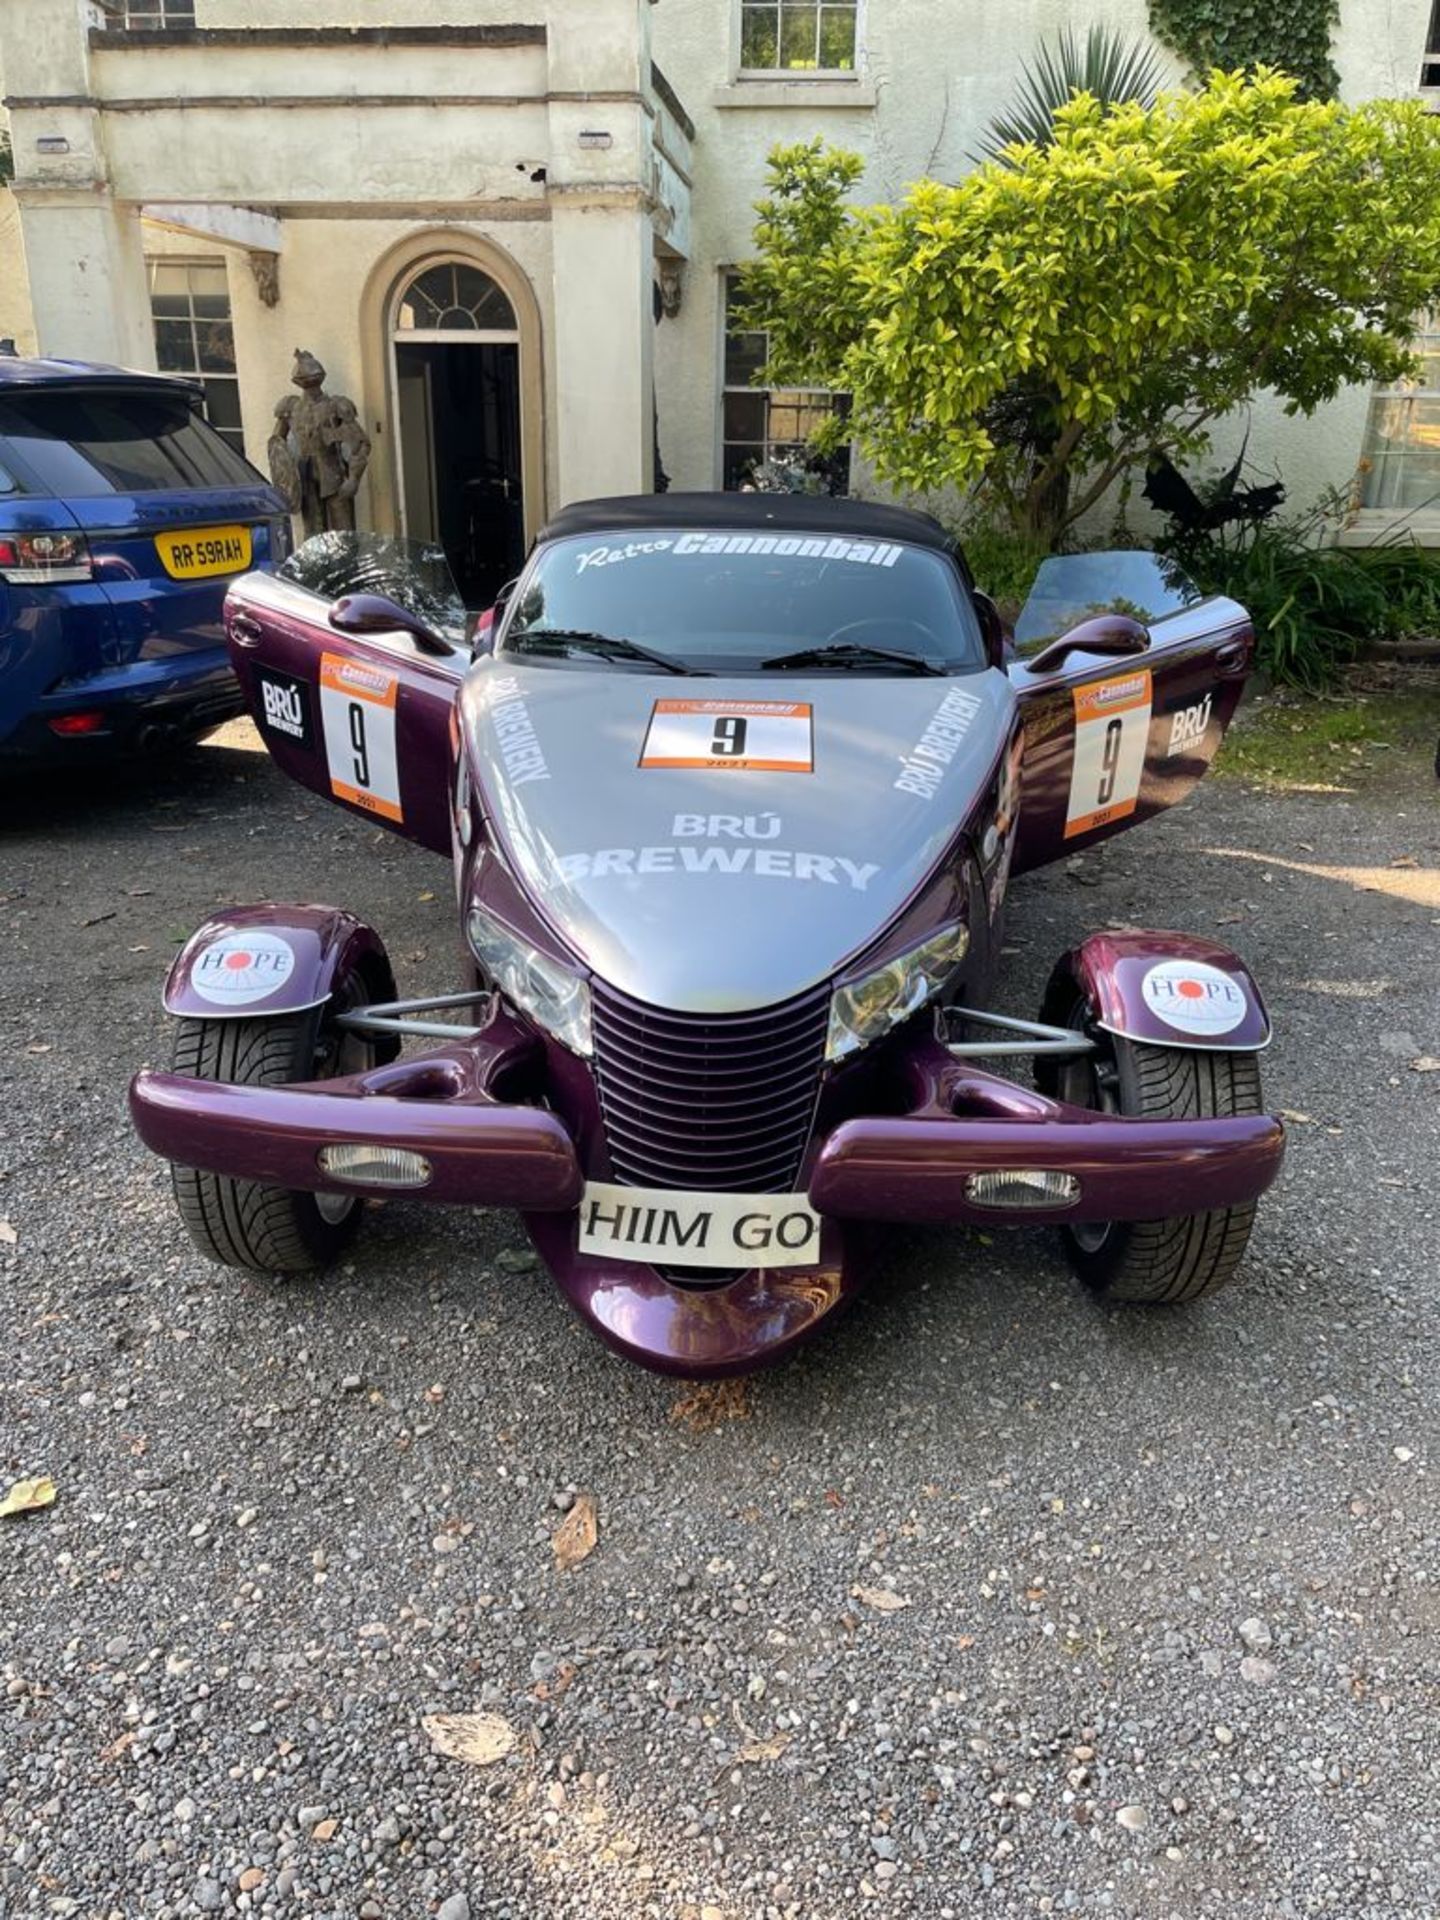 1998 CHRYSLER PLYMOUTH PROWLER V6 2 DOOR CONVERTIBLE, 3500cc PETROL ENGINE, AUTO *NO VAT* - Image 12 of 27